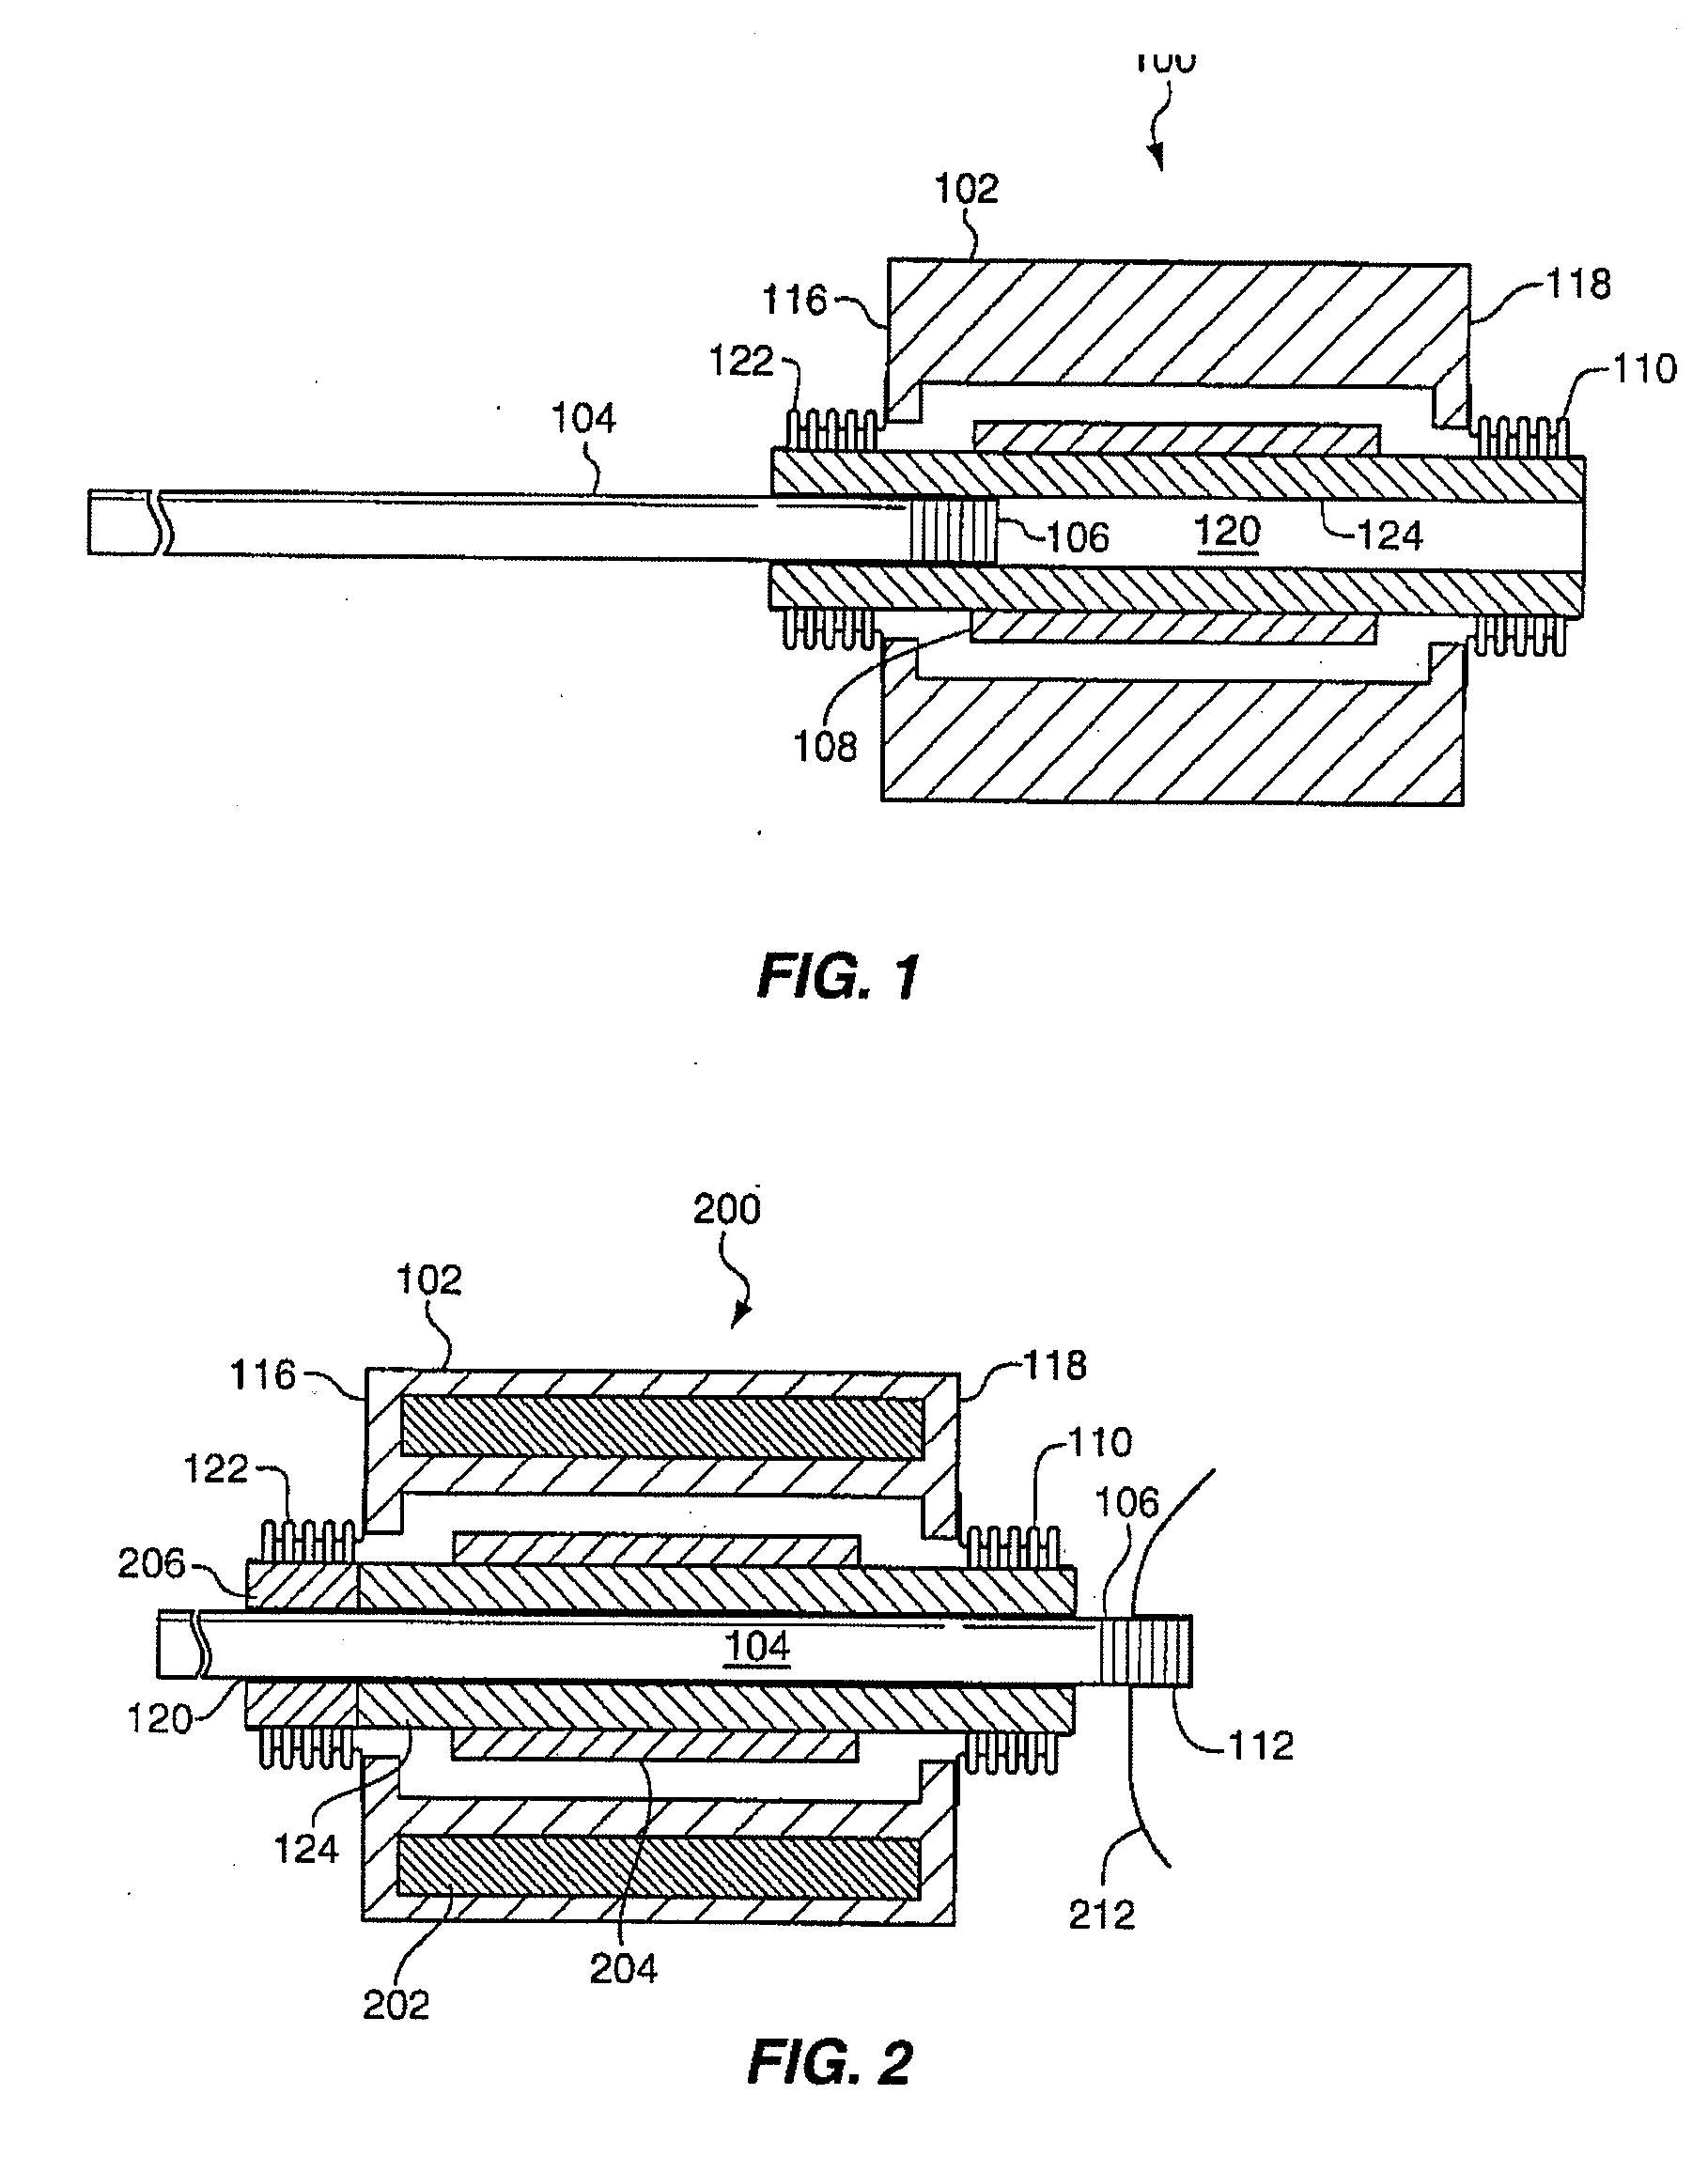 Implantable hearing aid transducer with advanceable actuator to faciliate coupling with the auditory system